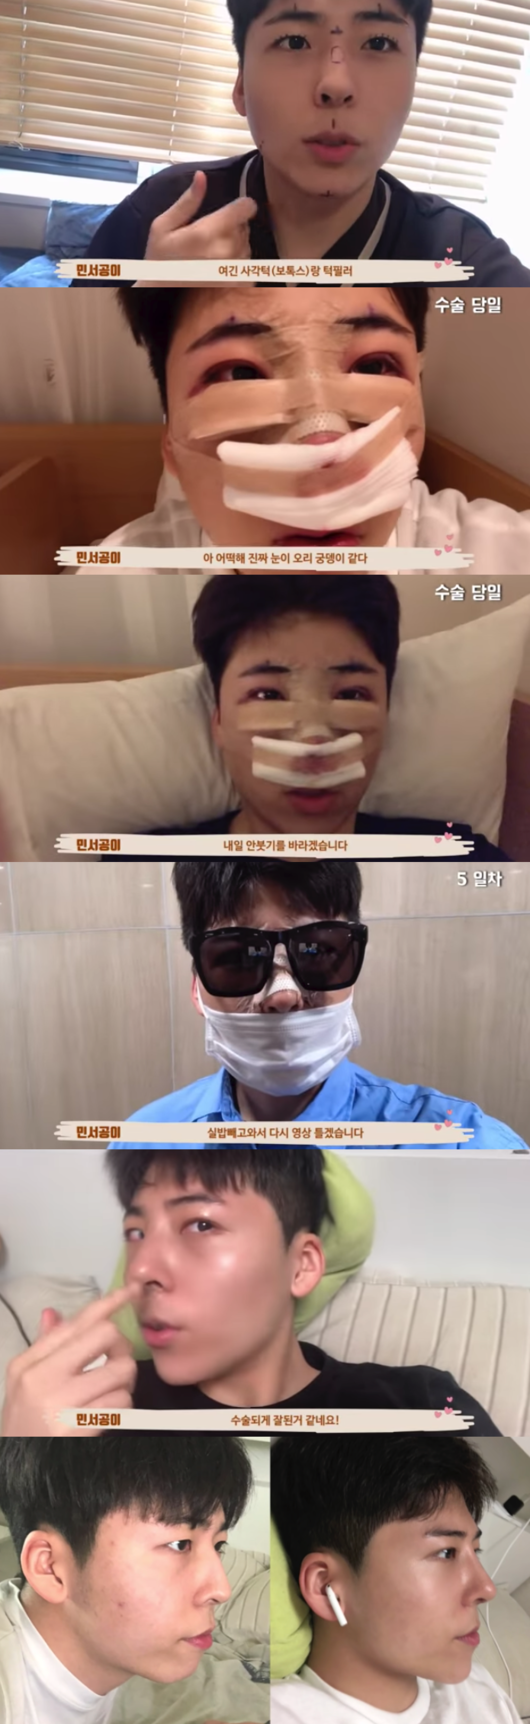 Kim Min-seo, who appeared on the show as Park Bo-gum Similiar, performed plastic surgery.Kim Min-seo posted a video titled Eye correction, Very Rico corrected! Plastic V log! on his YouTube channel.In the video, he said that he was not recommending surgery, but he was talking about the information, and he was consulted and paid by plastic surgeons.Kim Min-seo underwent eye correction and Very Rico surgery on the advice of the Moldmanleb Youtuber Young-Yearple; he was consulted seriously by a specialist, saying his eyes looked blurry.I decided to get a fat relocation under the eyes in the jaw filler, and the swelling immediately after the surgery was revealed.From the day of surgery, he recorded the video from the moment he pulled the stitches and played with fans, Gong Yoo. He also ate pumpkin juice, saying extracting the middle swelling.The moment of disinfection of the wound and the process of removing the cotton and splints are being released as a video and collecting hot topics.Im getting a little bit of a chin line, because I got a jaw filler. Im still bruised, but Ill play the video on the 14th.Very Rico was a complex, but the line became natural. Kim Min-seo, who was born in 2002, made headlines on KBS Joys Ask Anything broadcast in May, complaining that he is suffering from Park Bo-gum Similiar unintentionally.People have been struggling to spread photos on SNS.However, after the broadcast, some netizens ridicule and evil continued, Kim Min-seo explained, I was not in good shape the other day, so I was not swelling my face and was not in a hurry.He also added, I sue all the evil!image capture